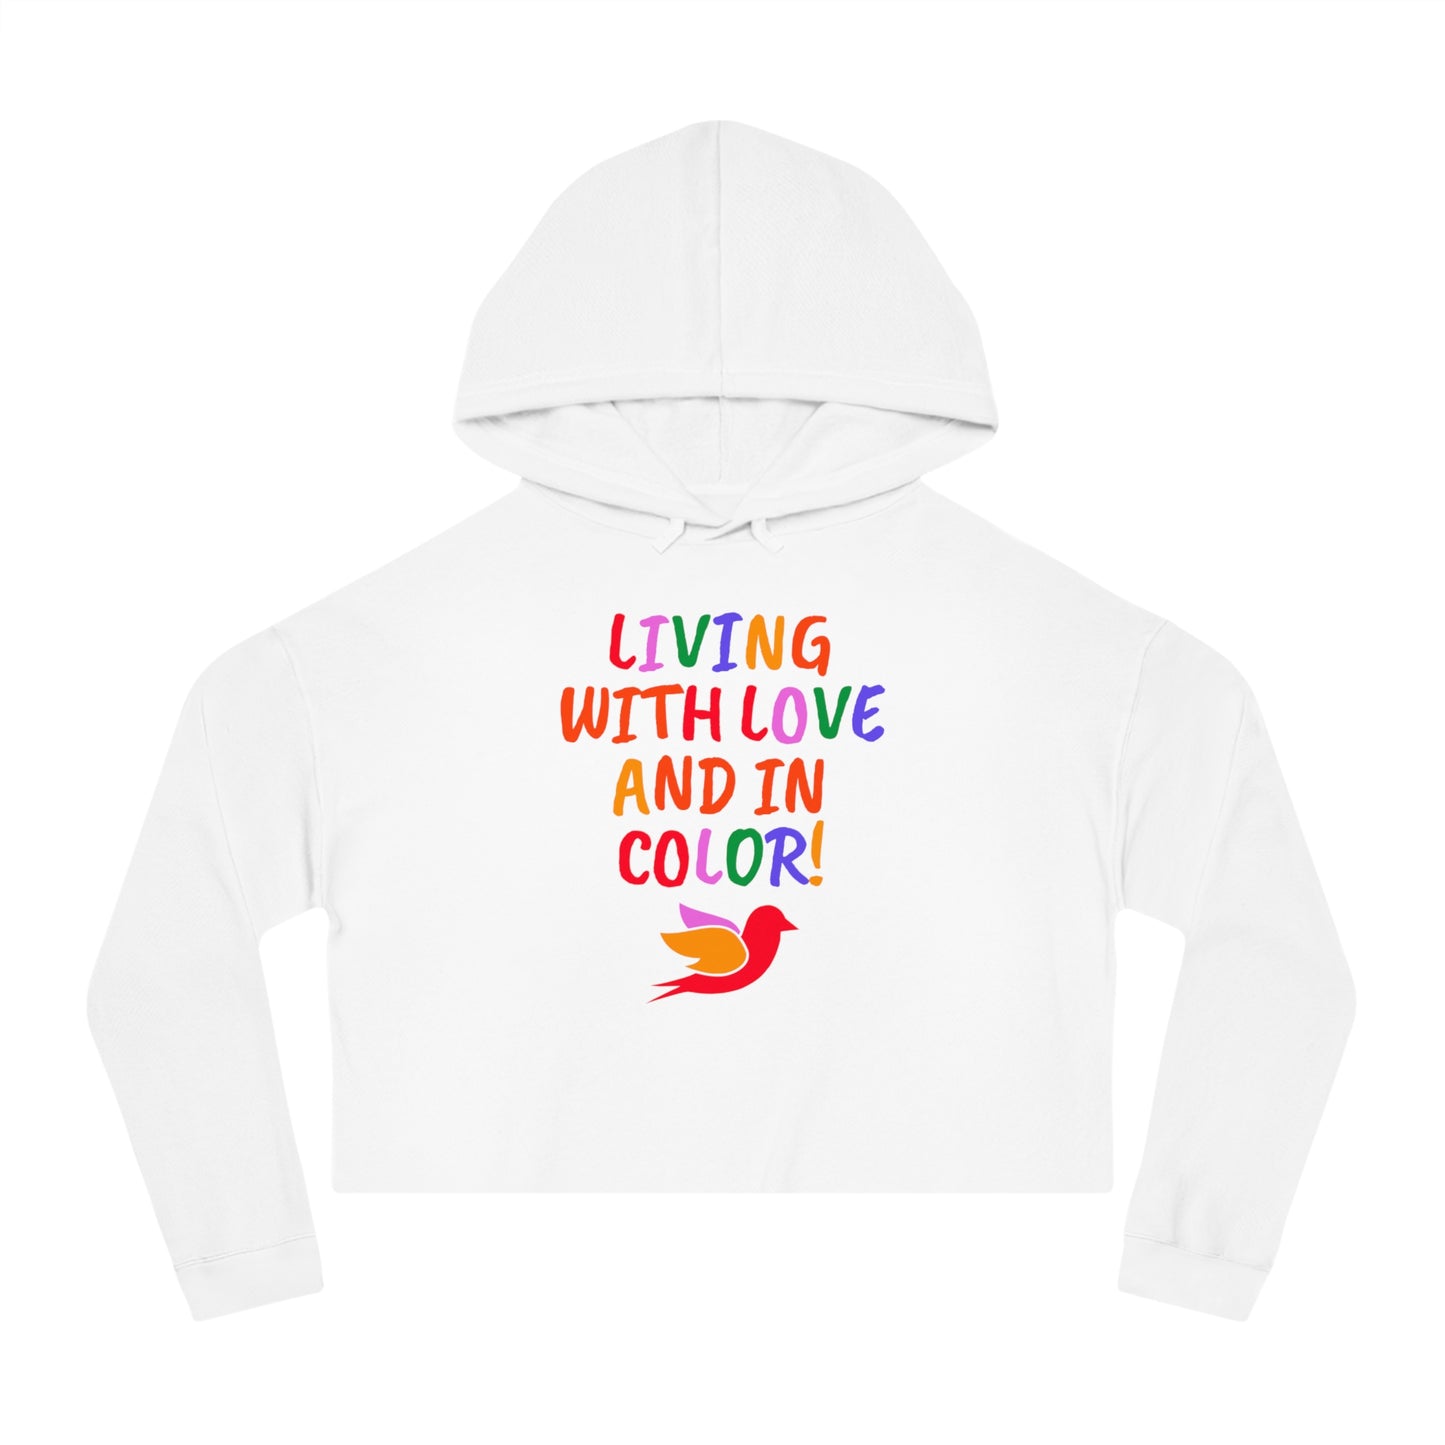 Love & Color Women’s Cropped Hooded Sweatshirt (3 colors)